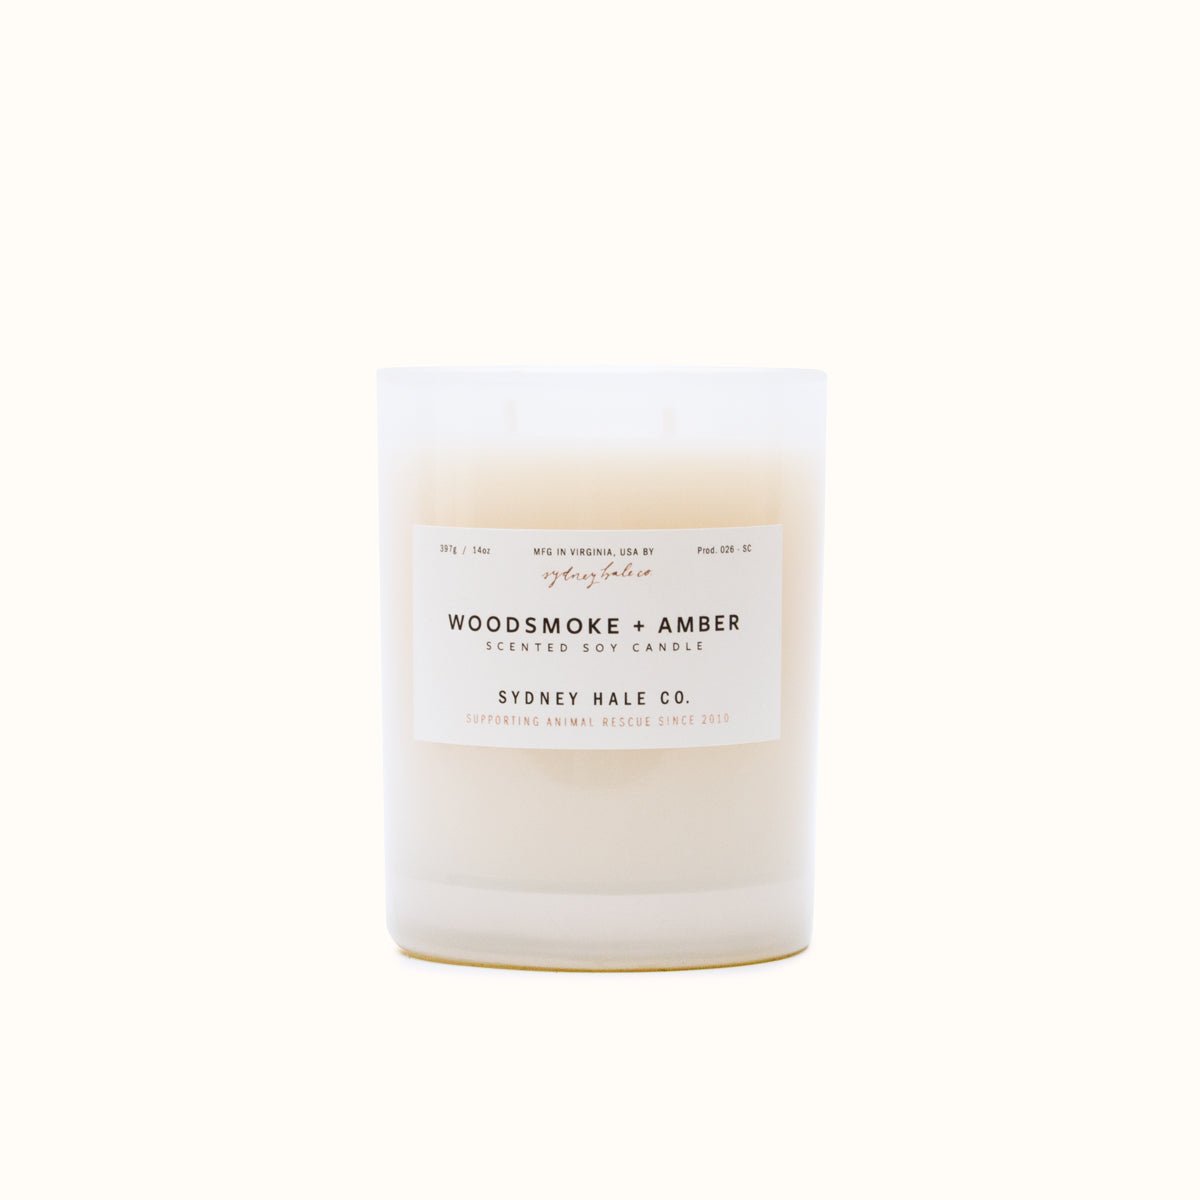 A cylindrical glass candle filled with a soy wax blend and two double cotton wicks. Label reads: "397g/14 oz. Manufactured in Virginia, USA by Sydney Hale Co. Woodsmoke + Amber scented soy candle. Sydney Hale Co. Supporting Animal rescue since 2010."